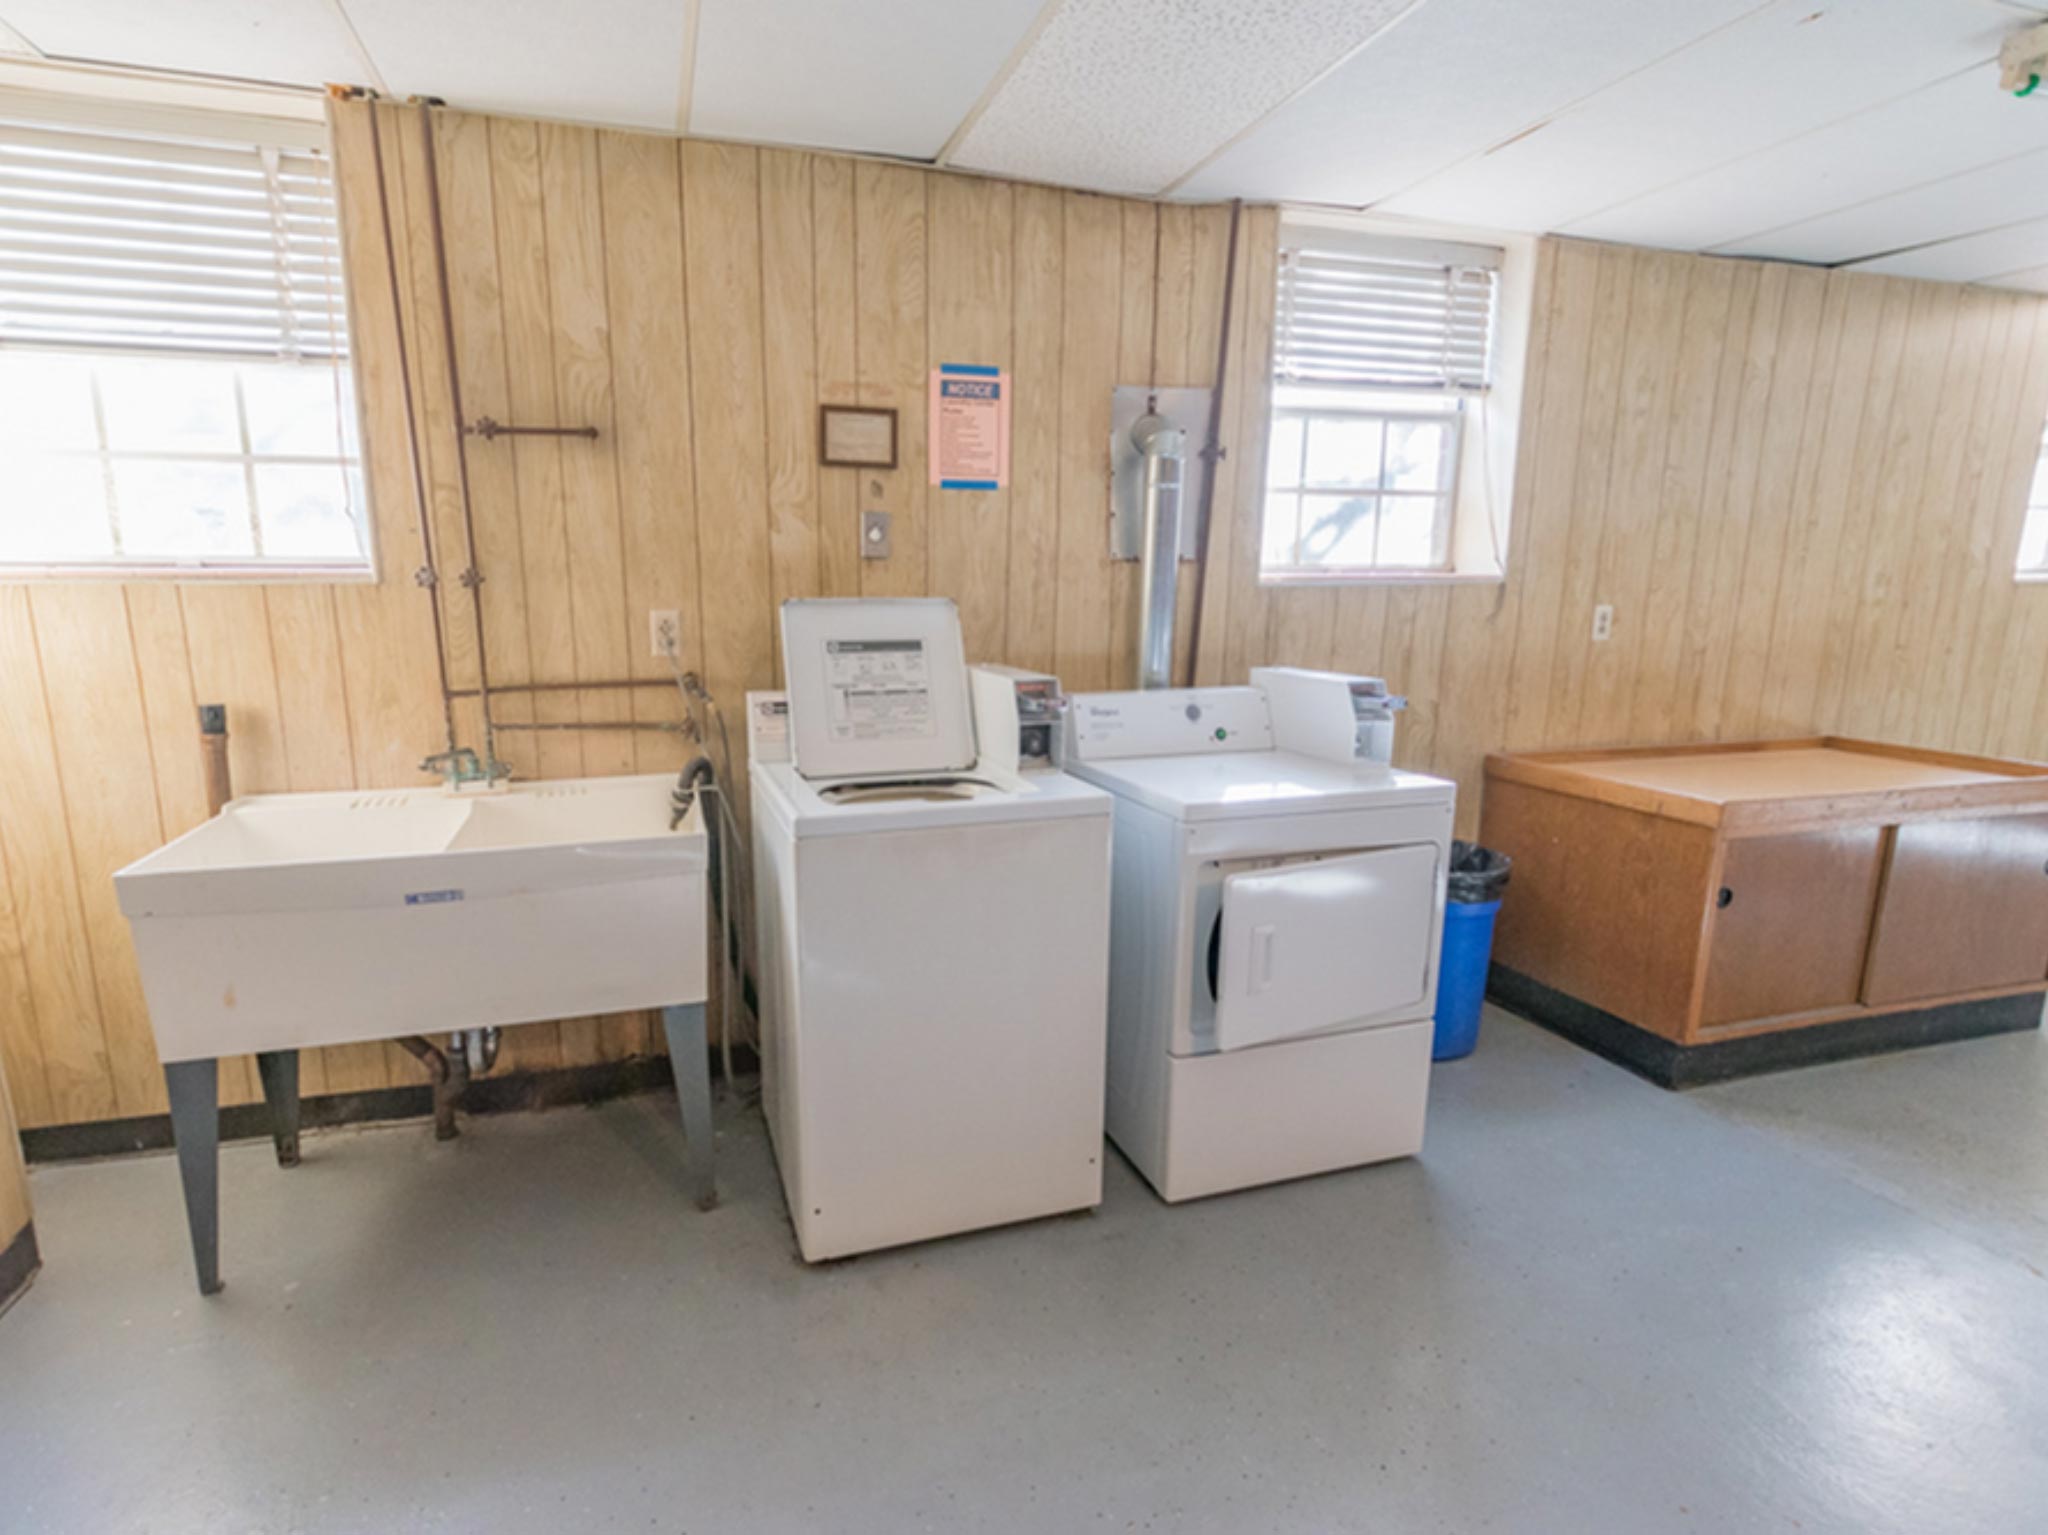 On-site laundry facility for residents.